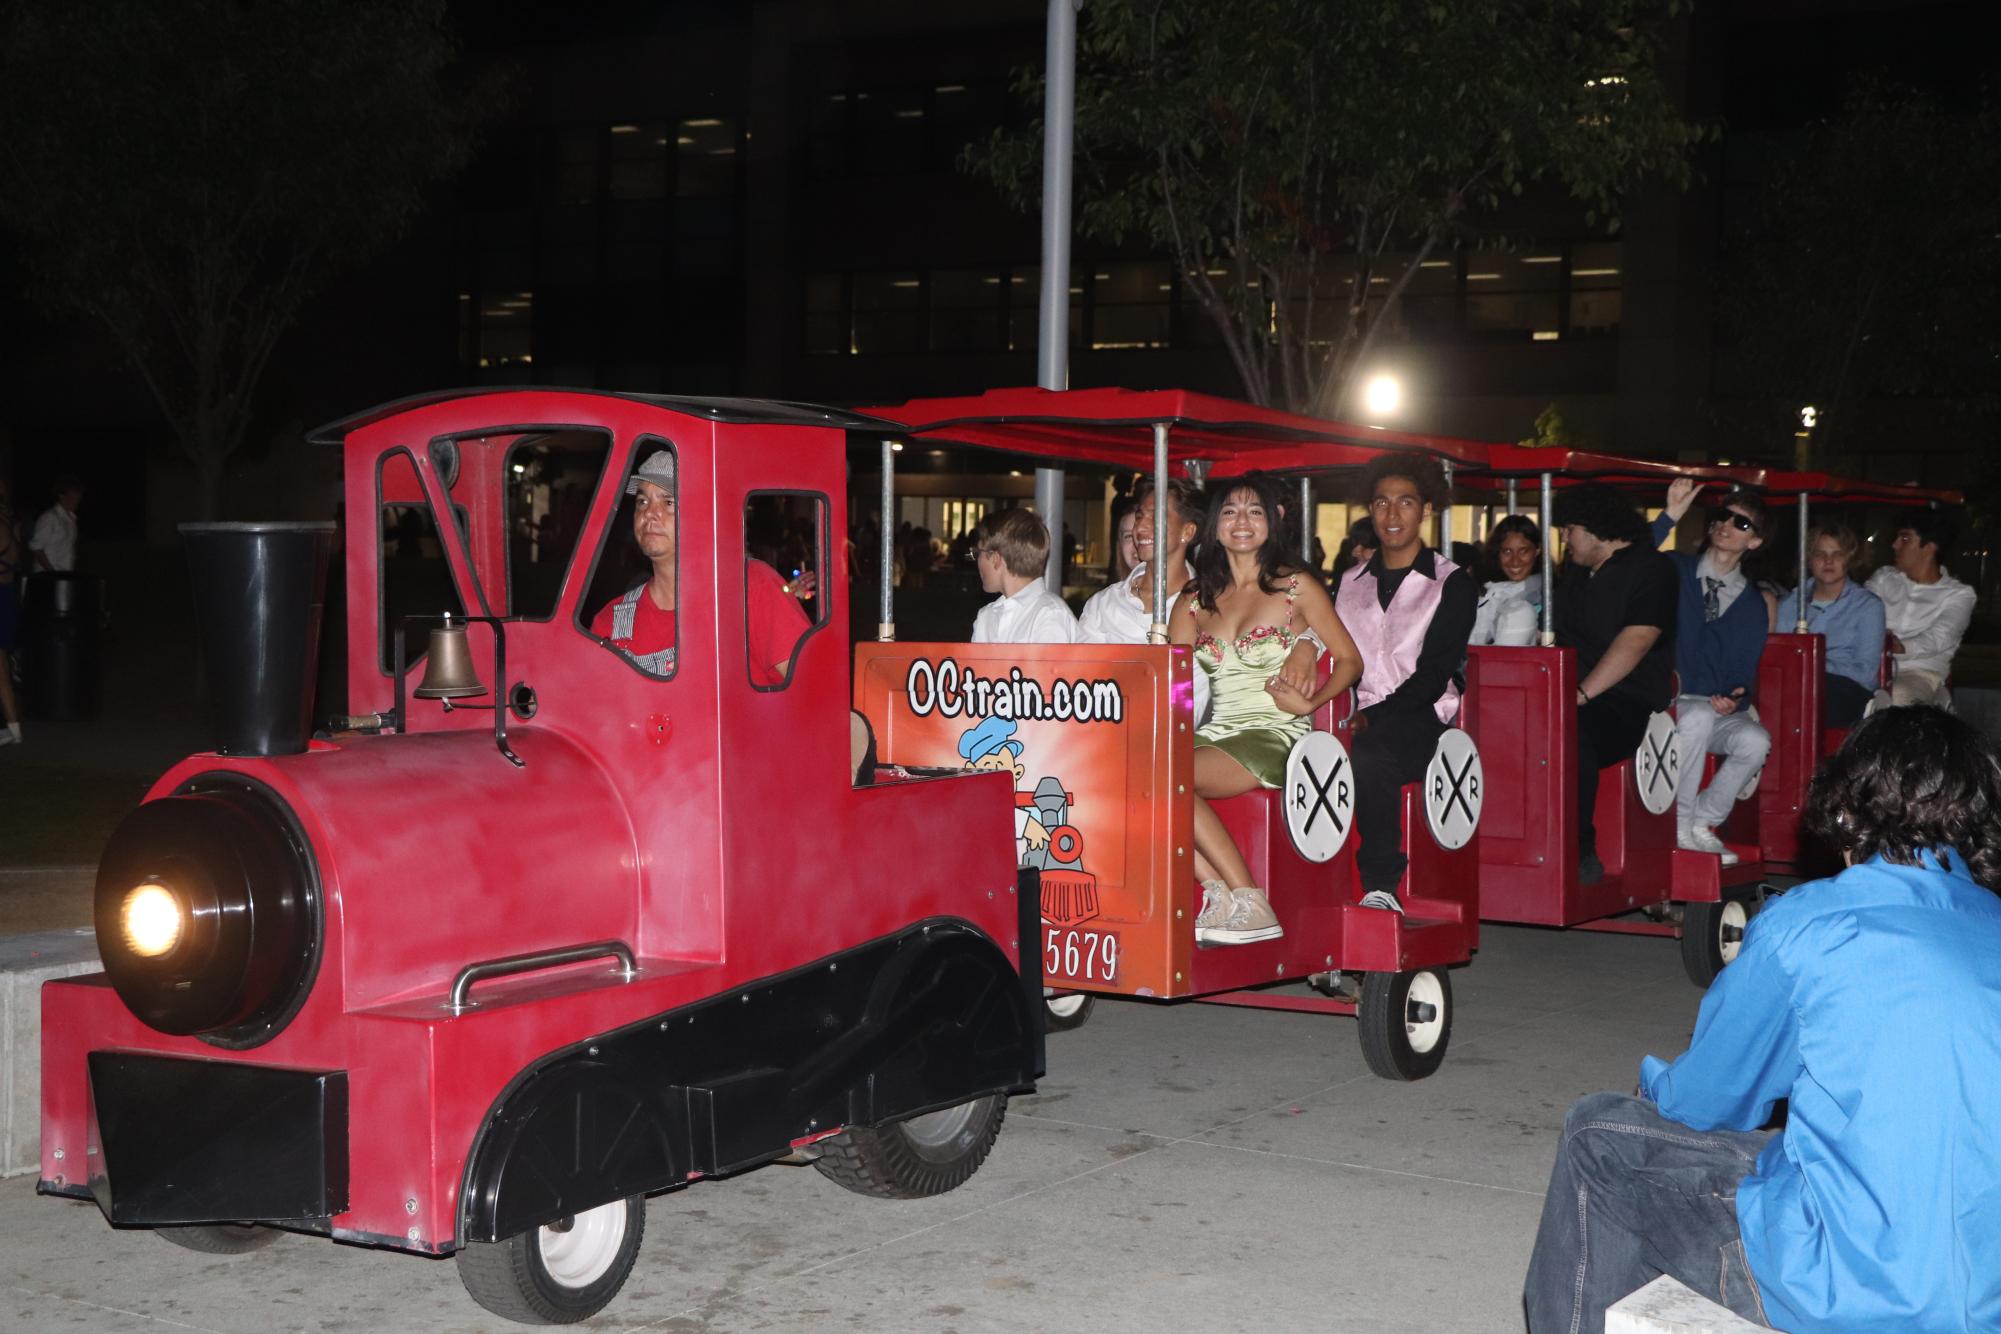 Students on a little train ride around campus on Oct. 7. during Homecoming.